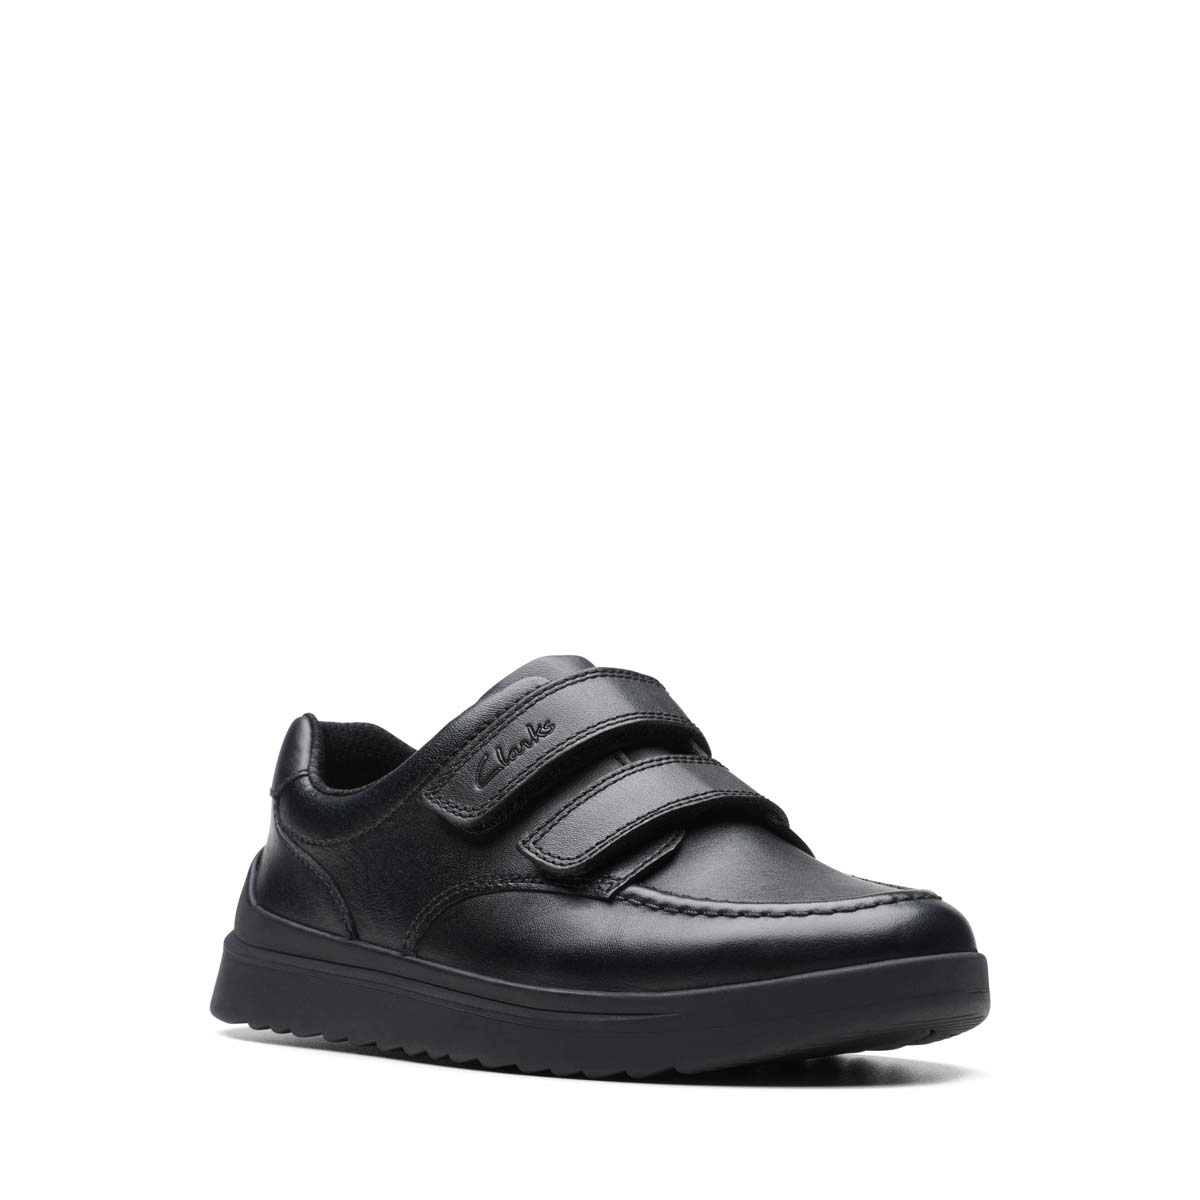 Clarks Goal Style K Black leather Kids Boys Shoes 7535-46F in a Plain Leather in Size 1.5